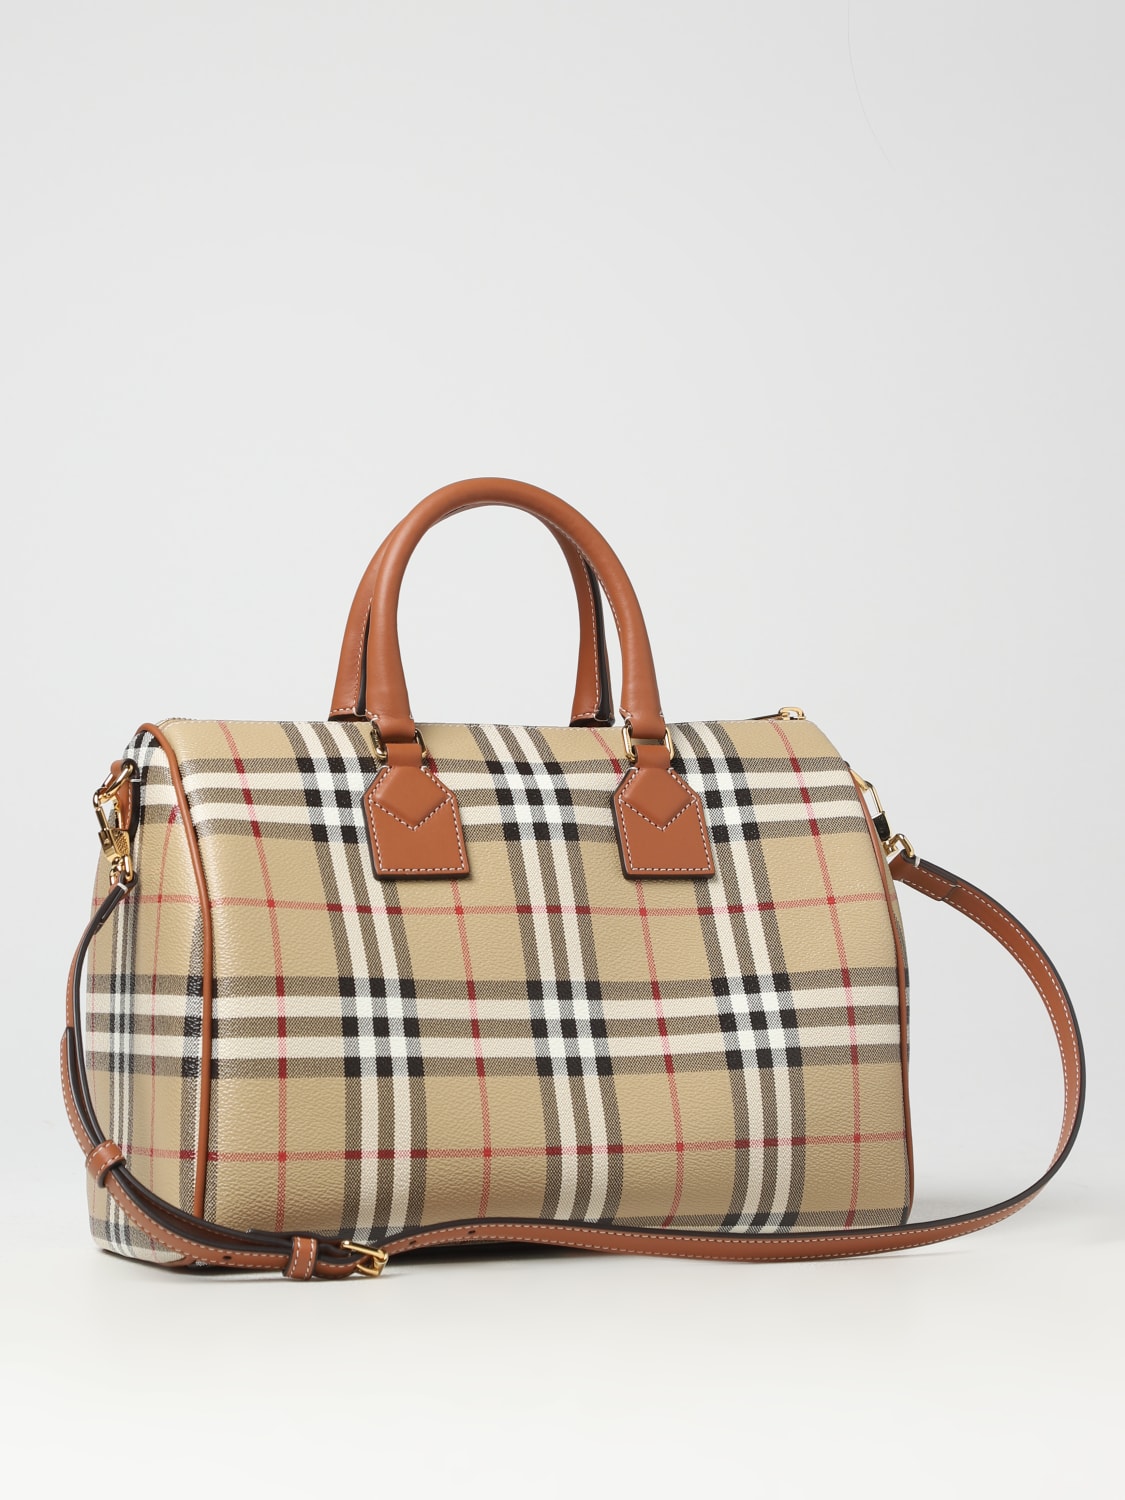 Burberry Beige/Brown Haymarket Check Coated Canvas and Leather Boston Bag  Burberry